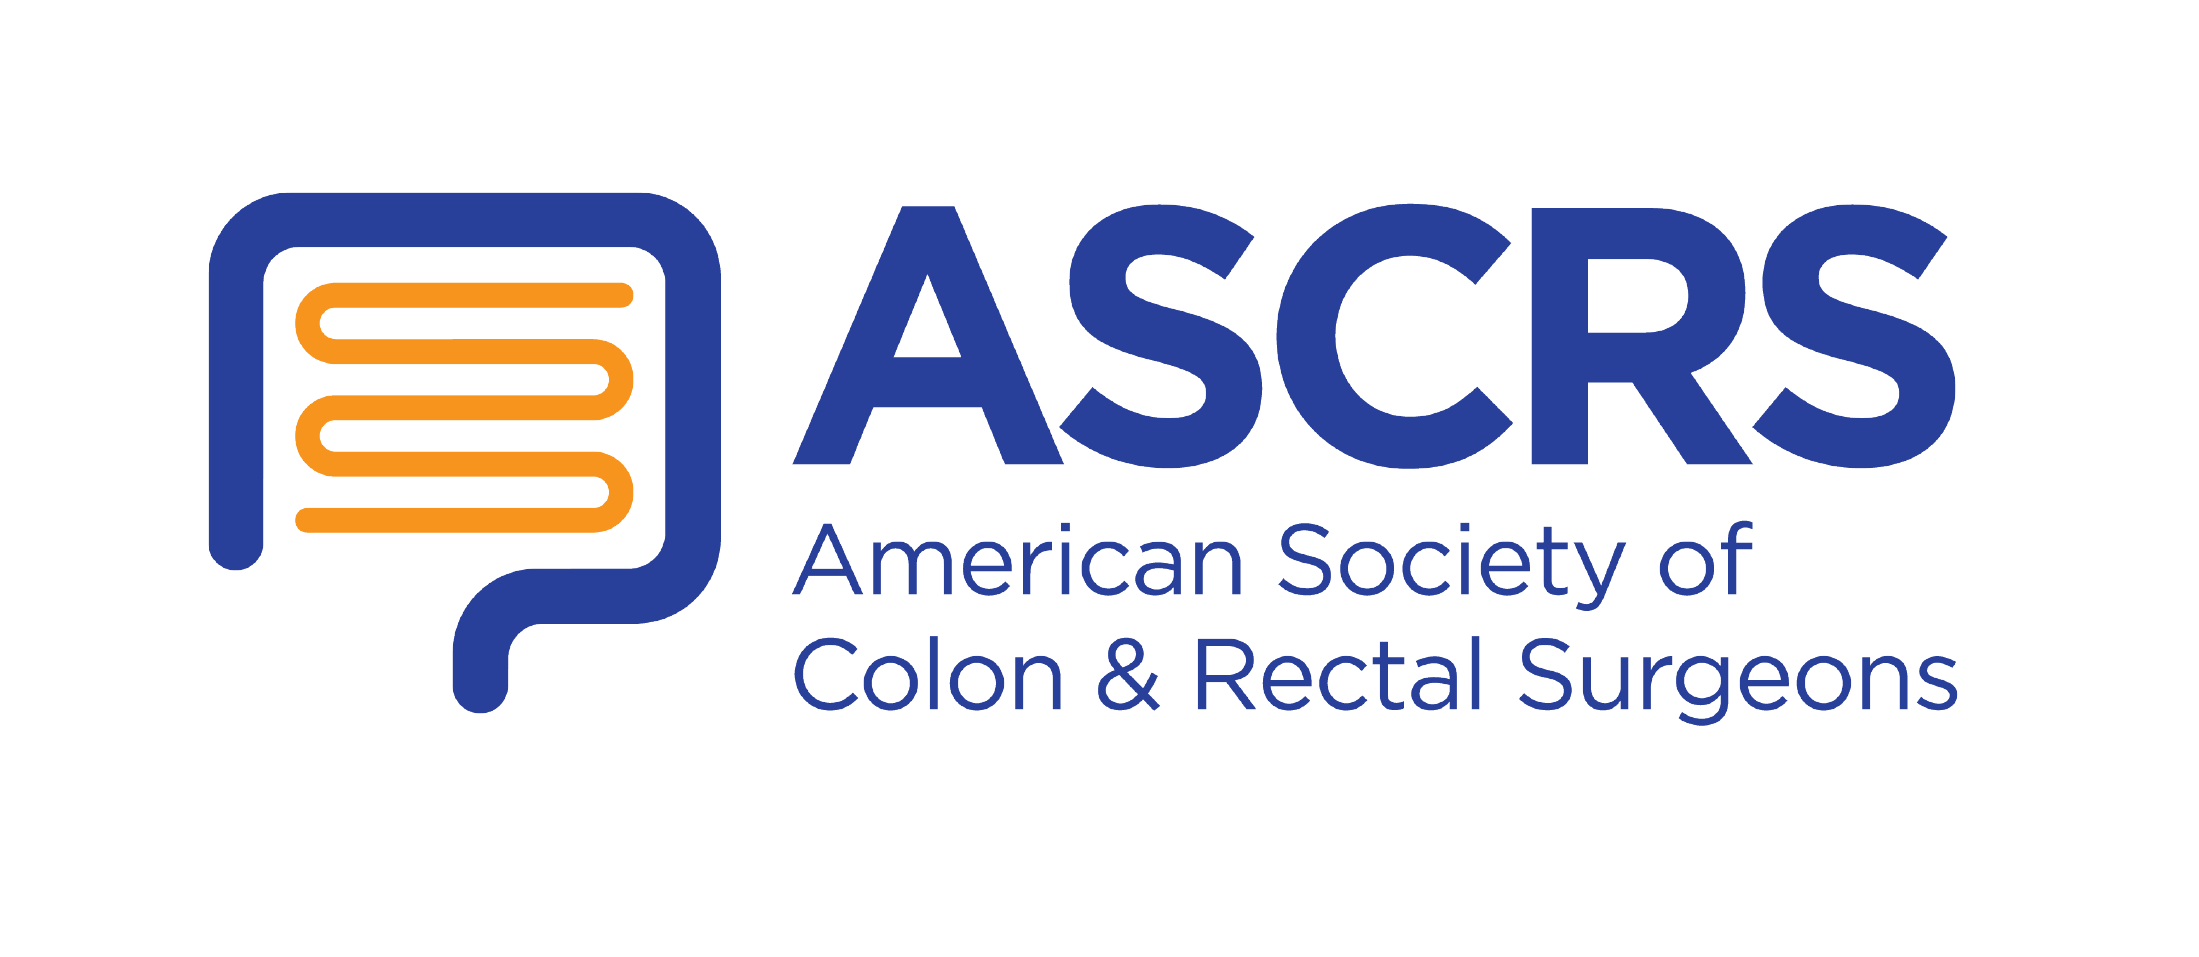 American Society of Colon and Rectal Surgeons logo